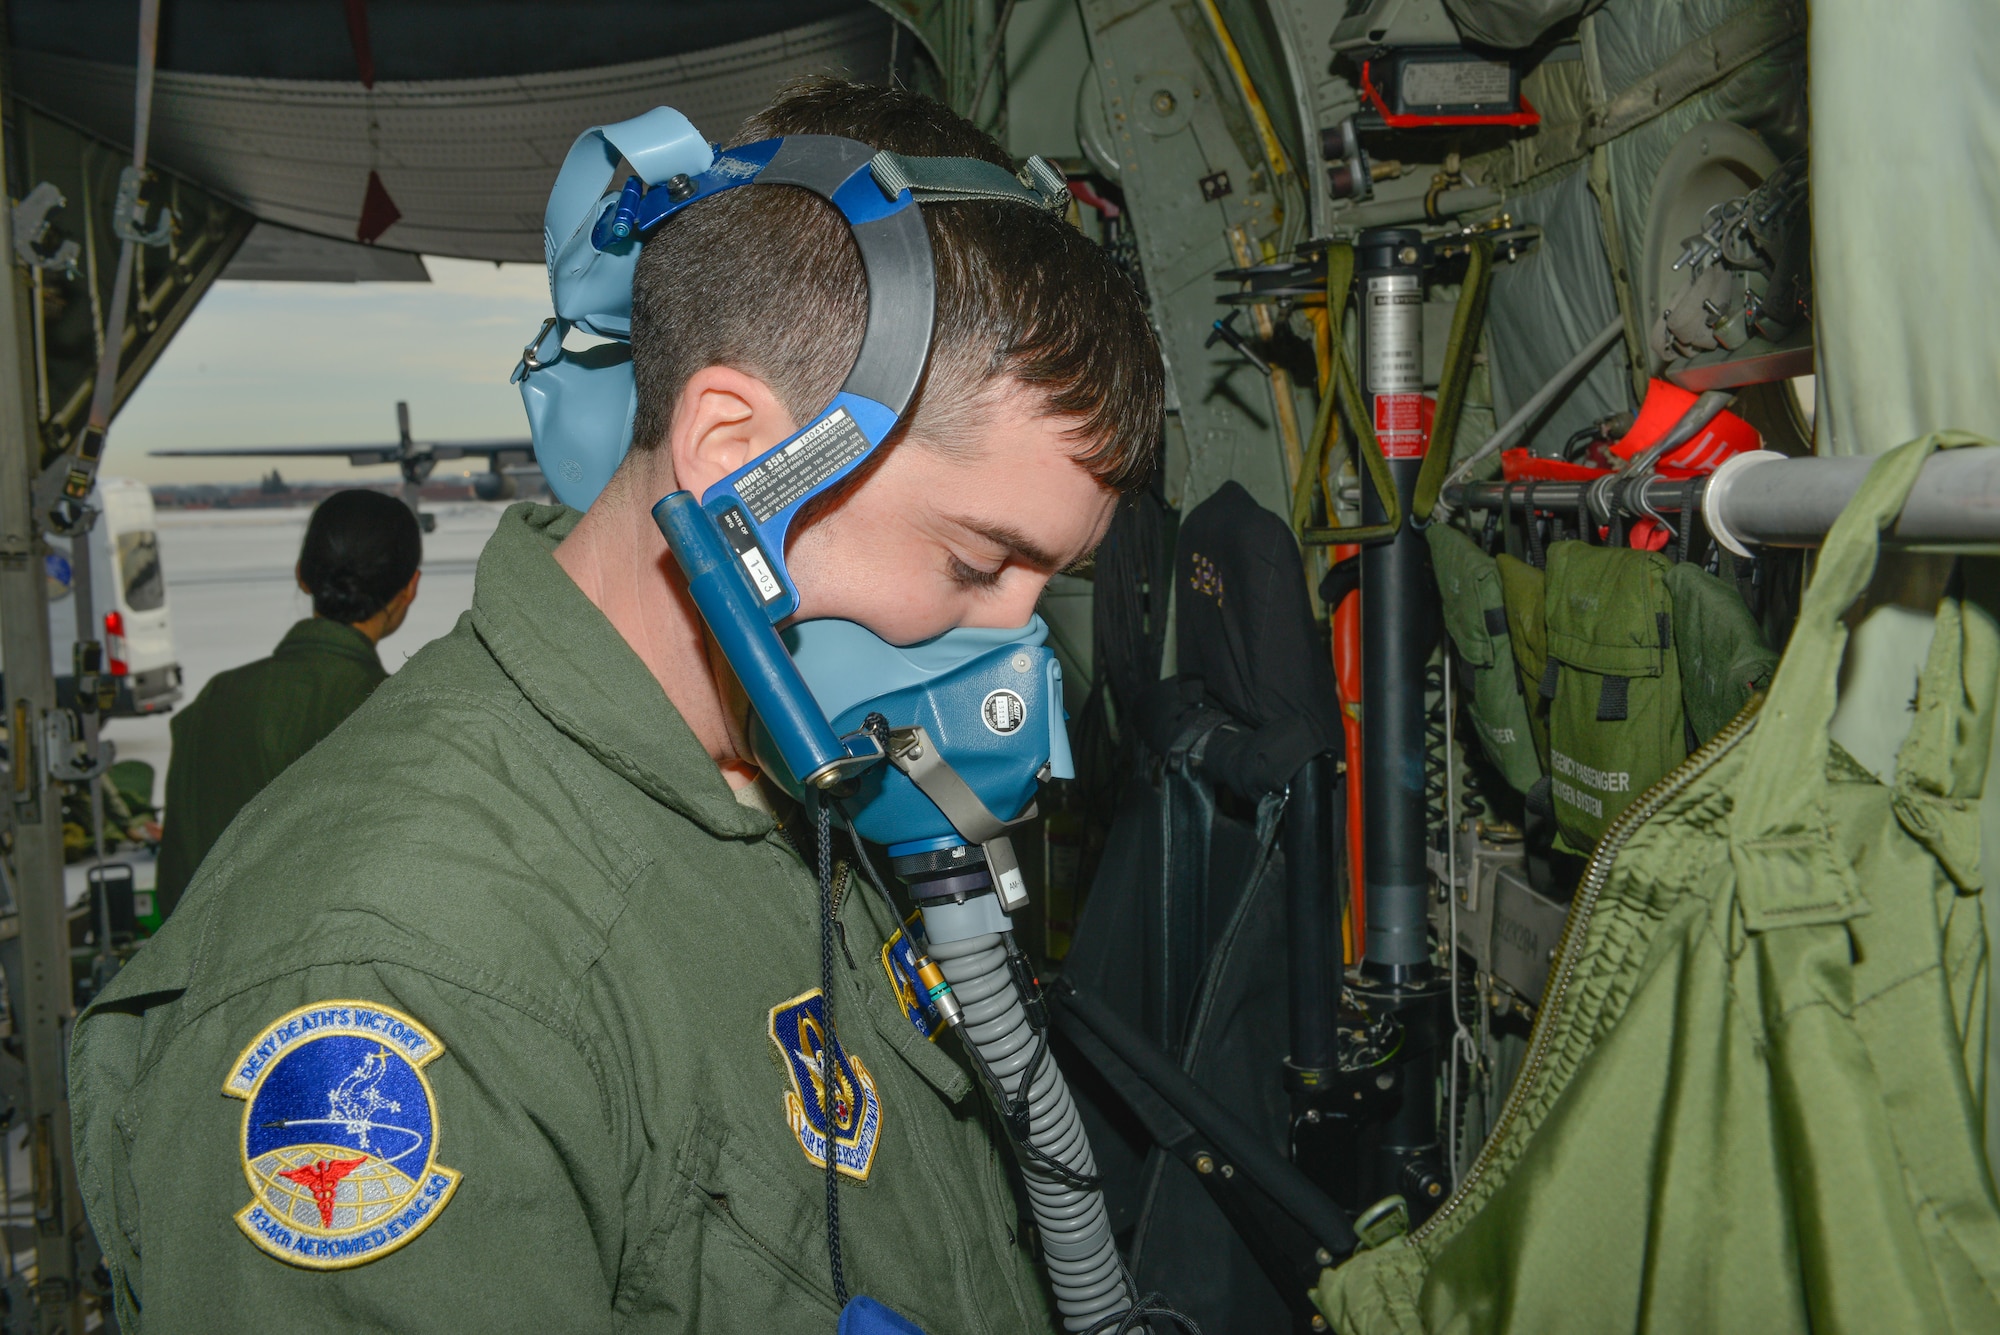 Tech. Sgt. Jesse Guest, a reserve aeromedical technician with the 934th Aeromedical Evacuation Squadron, tests his self-contained breathing equipment prior to participating in a trainer mission  at the Minneapolis-St. Paul Air Reserve Station, Minn., on Jan. 8, 2018. The trainer missions provide training in aeromedical evacuation procedures and combat medical support. (U.S. Air Force photo by Master Sgt. Eric Amidon)